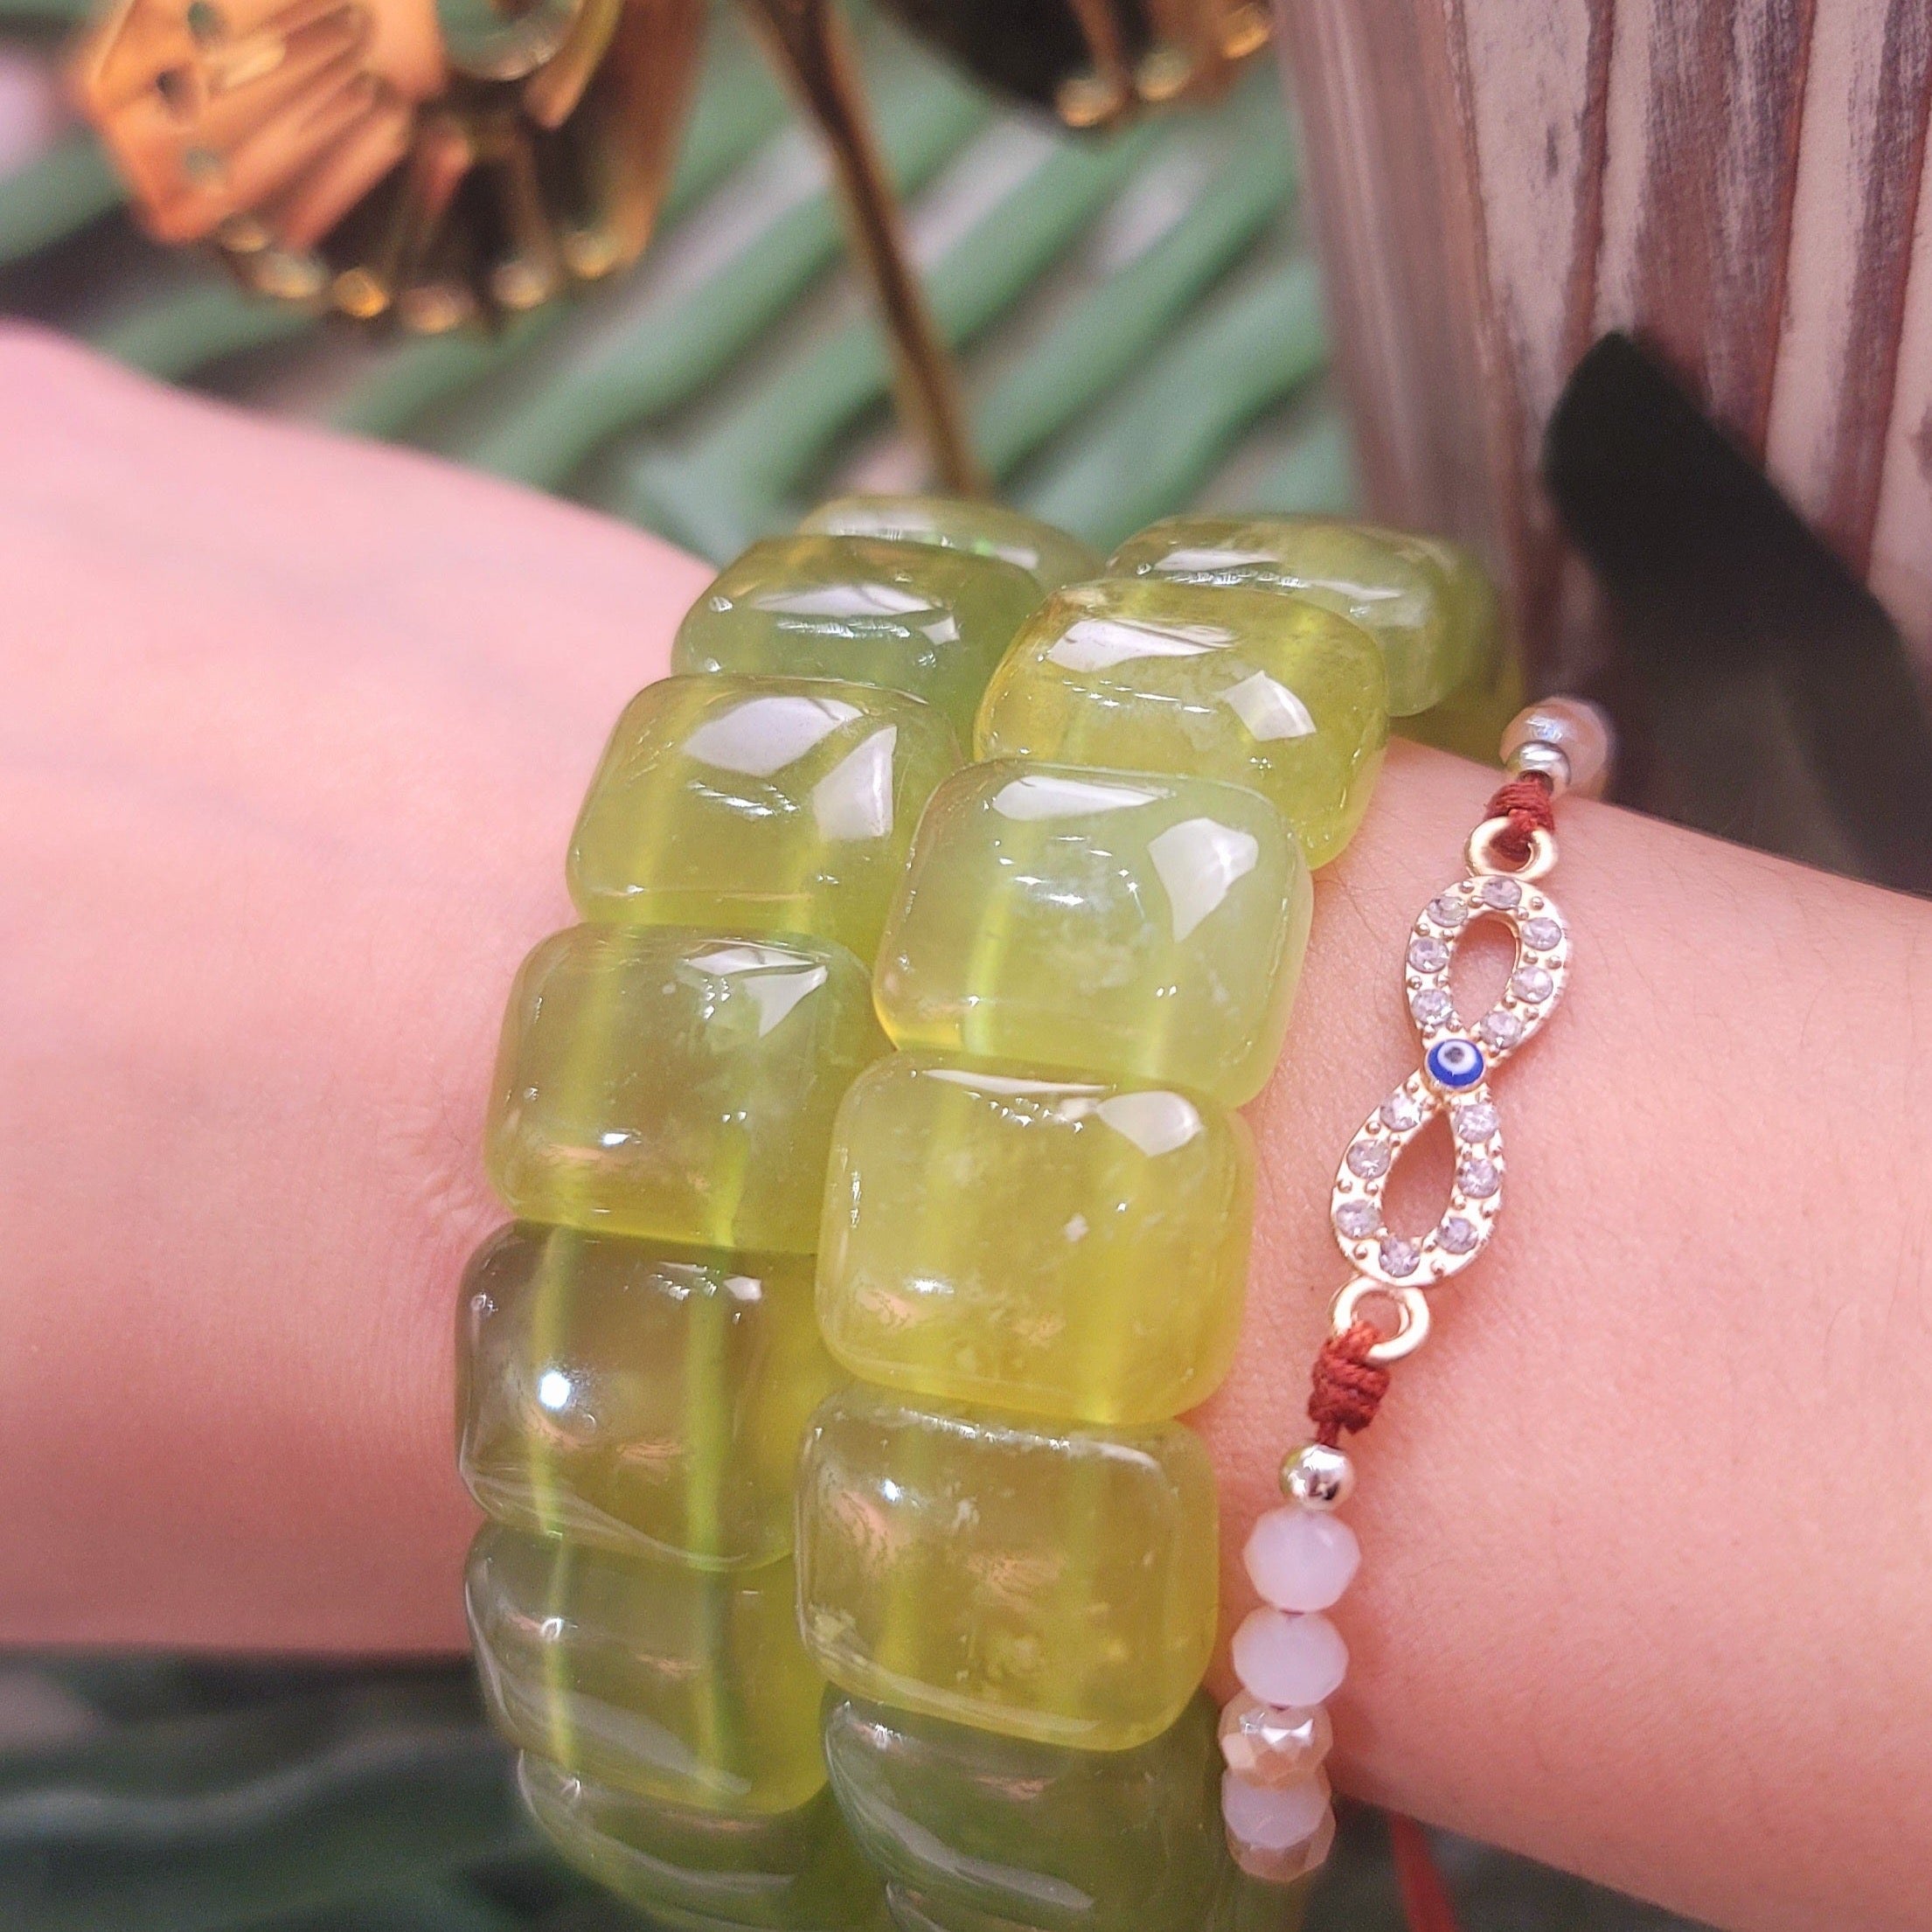 Serpentine Stretchy Bracelet Bangle for Clearing Energetic Blockages and Cellular Regeneration